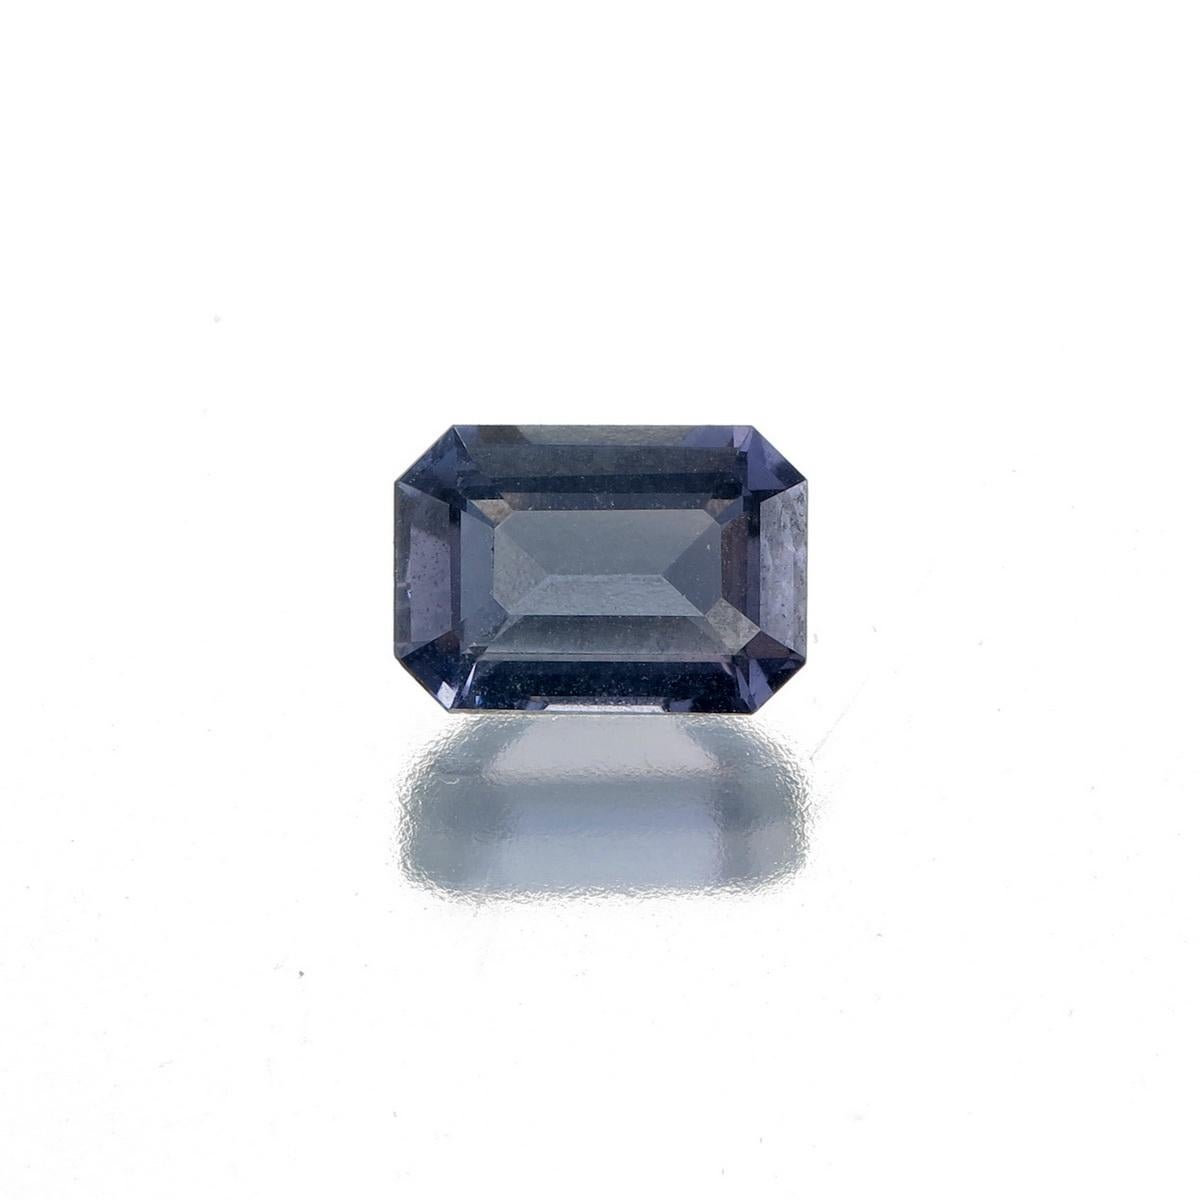 1.64 Carat Natural Purple Spinel from Burma
Dimension: 8.37 x 5.91 x 3.52 mm
Weight: 1.64 Carat
Shape: Octagon Cut
No Heat
GIL Certified Report No; STO2022102151331